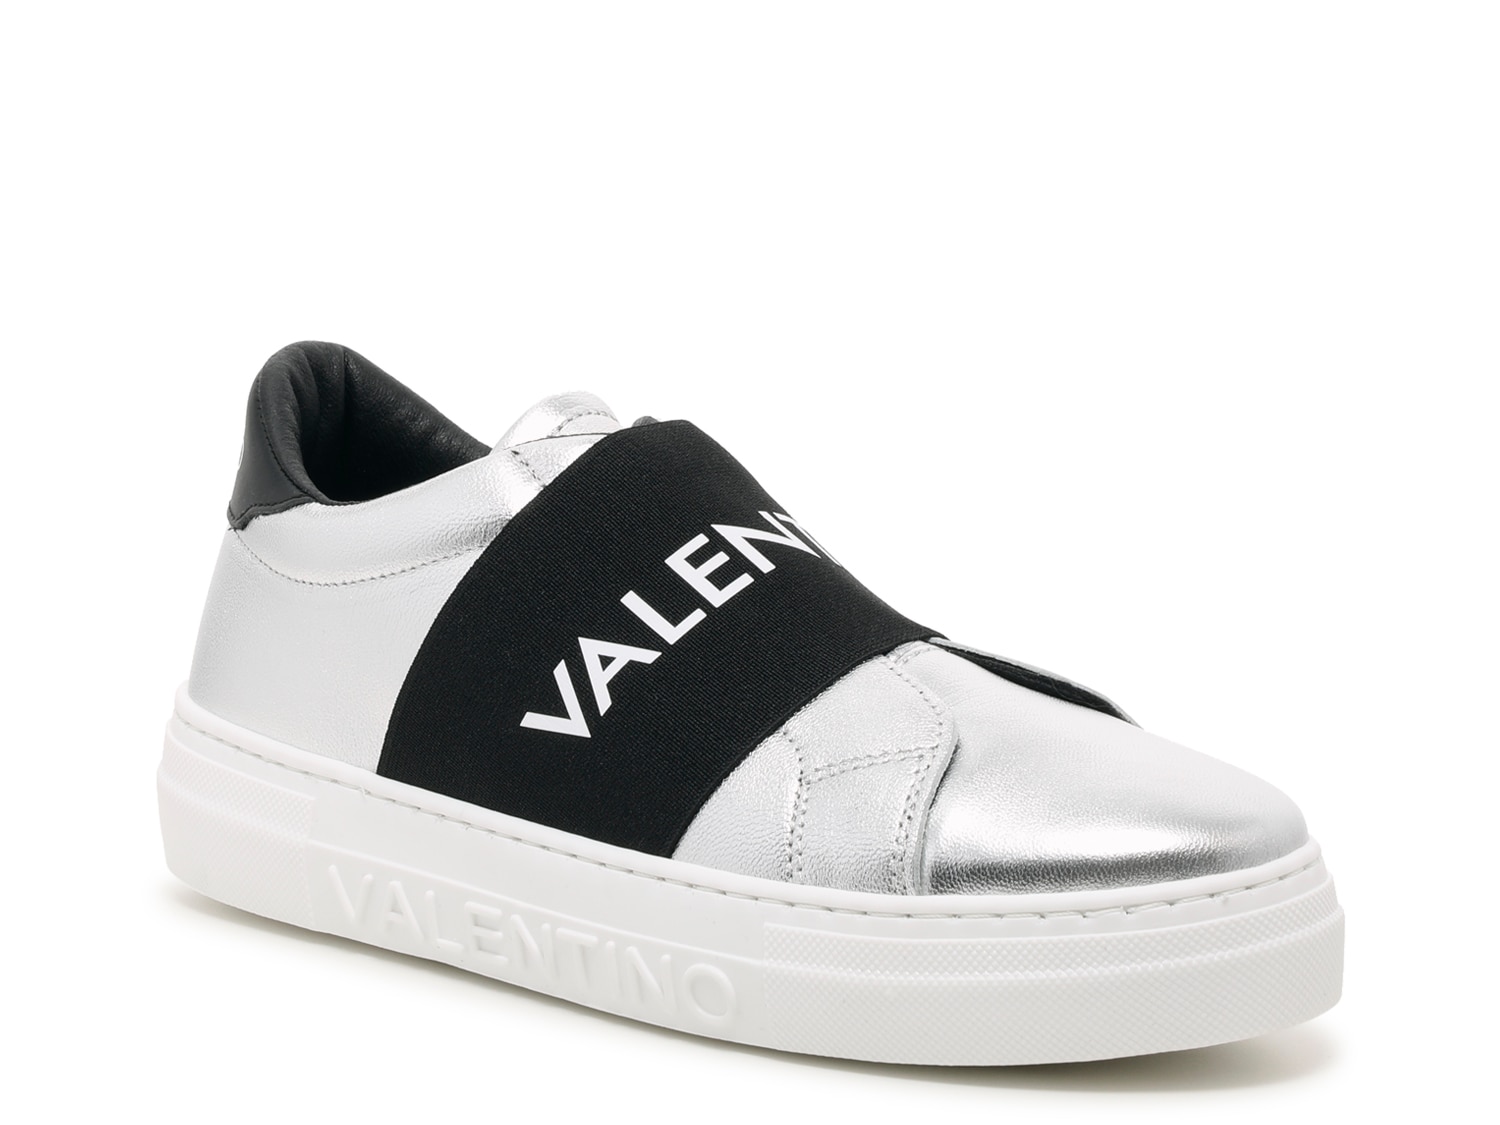 Mario Valentino Lace-Up Fashion Sneakers